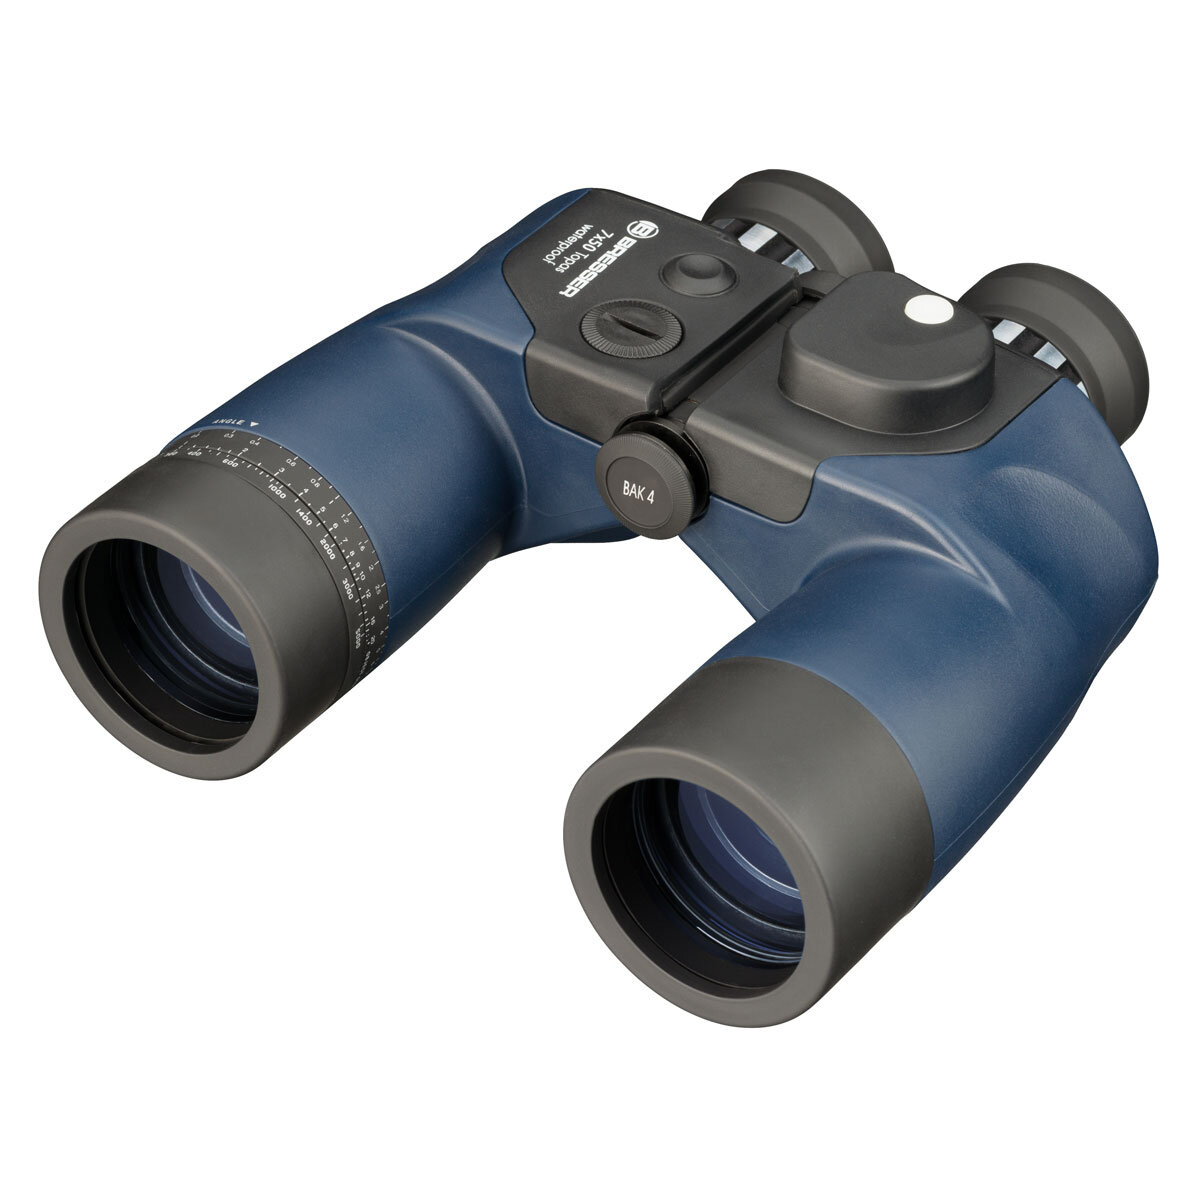 Lead Image for Bresser Topas 7x50 Binoculars with Built-in Compass